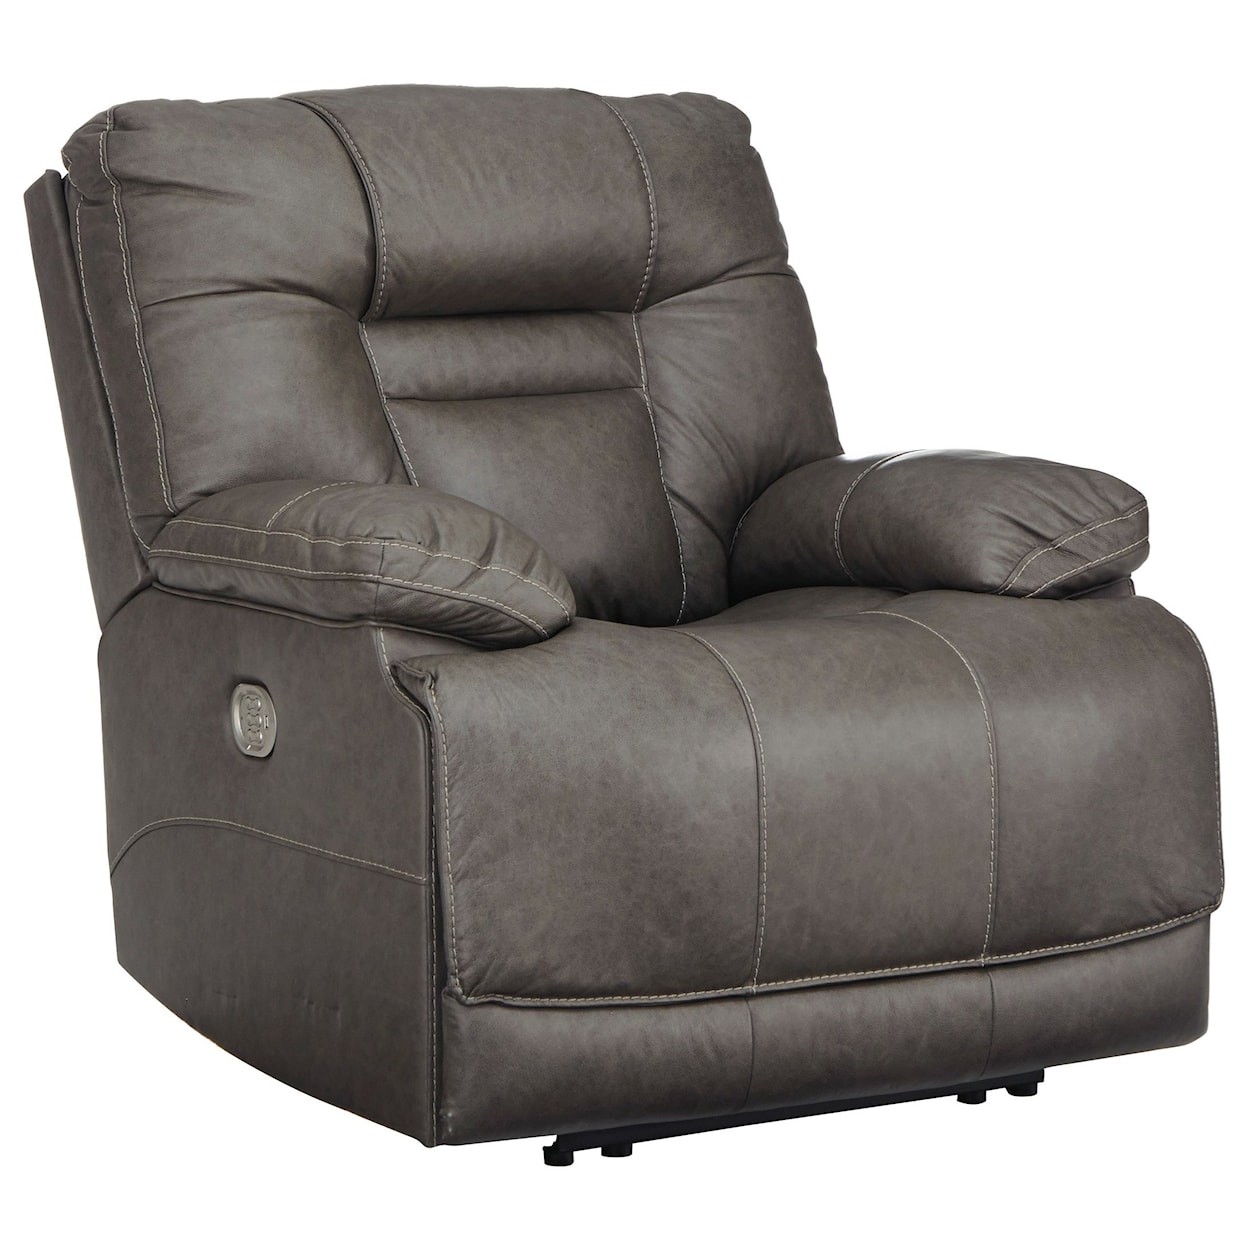 Signature Watson Leather TRIPLE Power Recliner